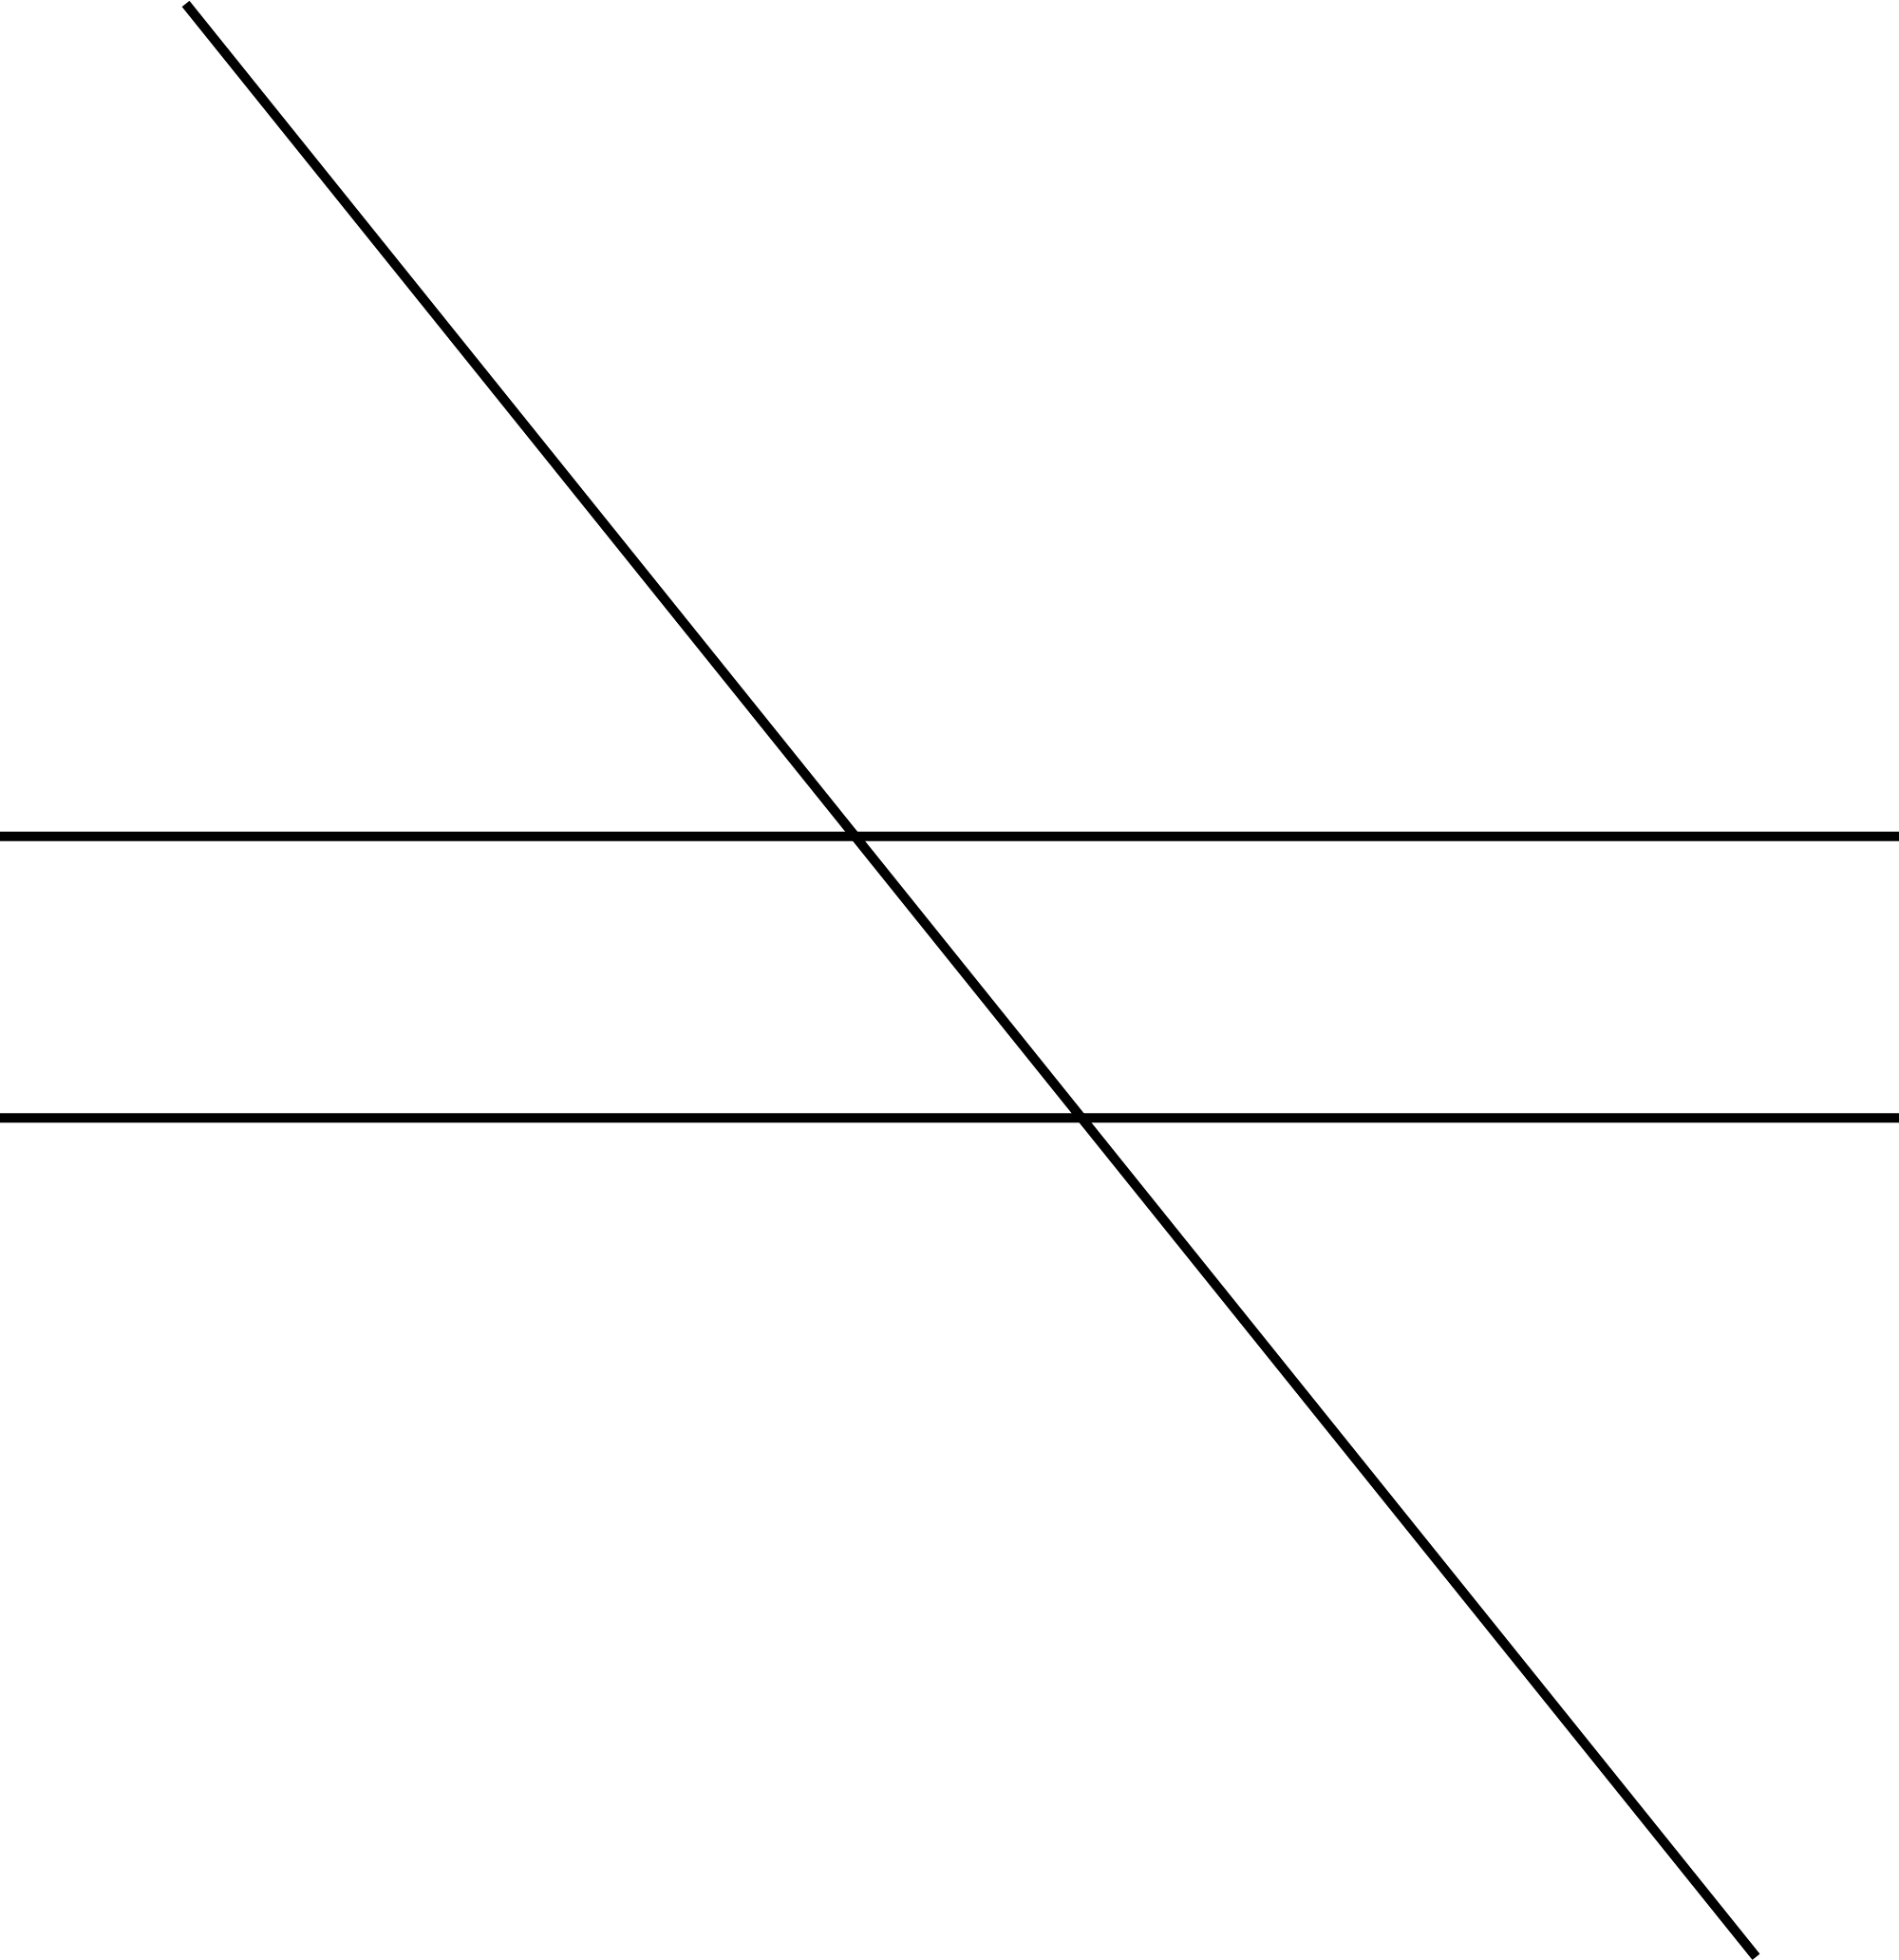 Intersected parallel lines